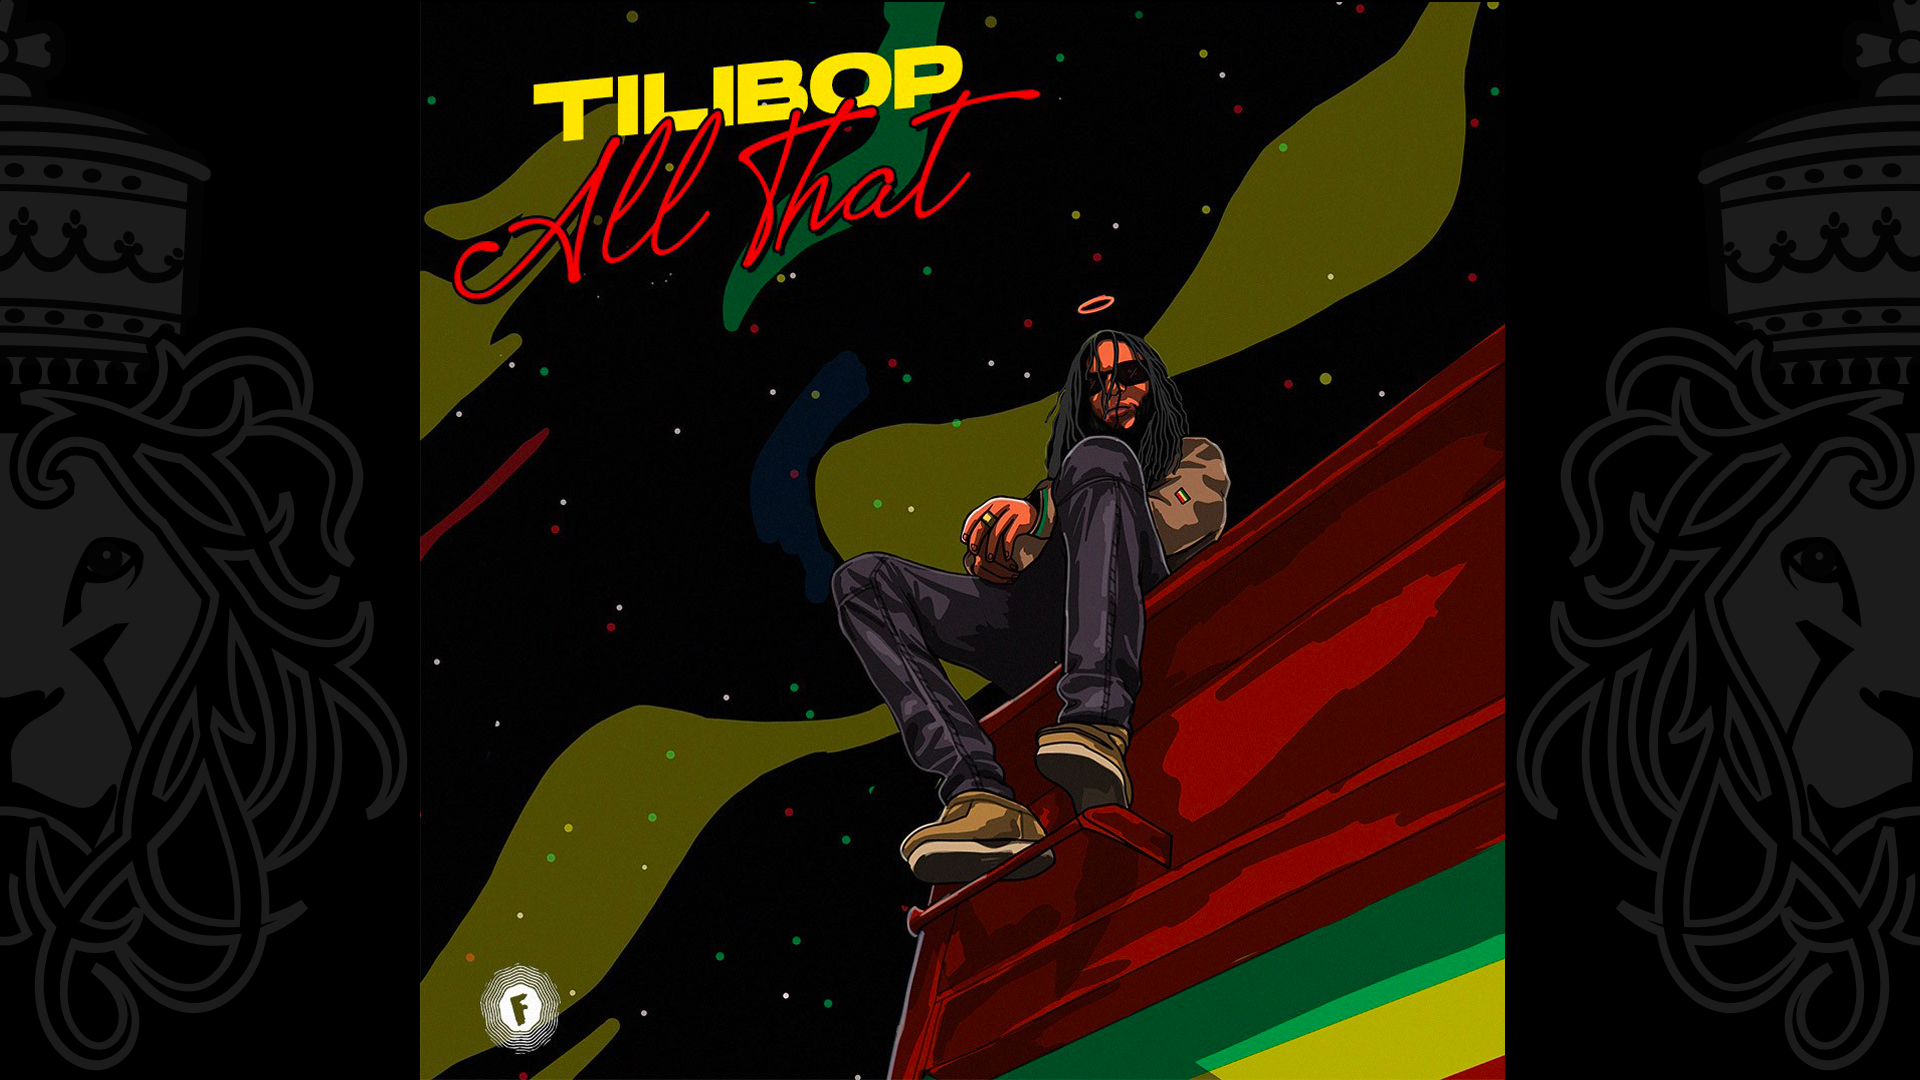 Tilibop releases his new single "All That"